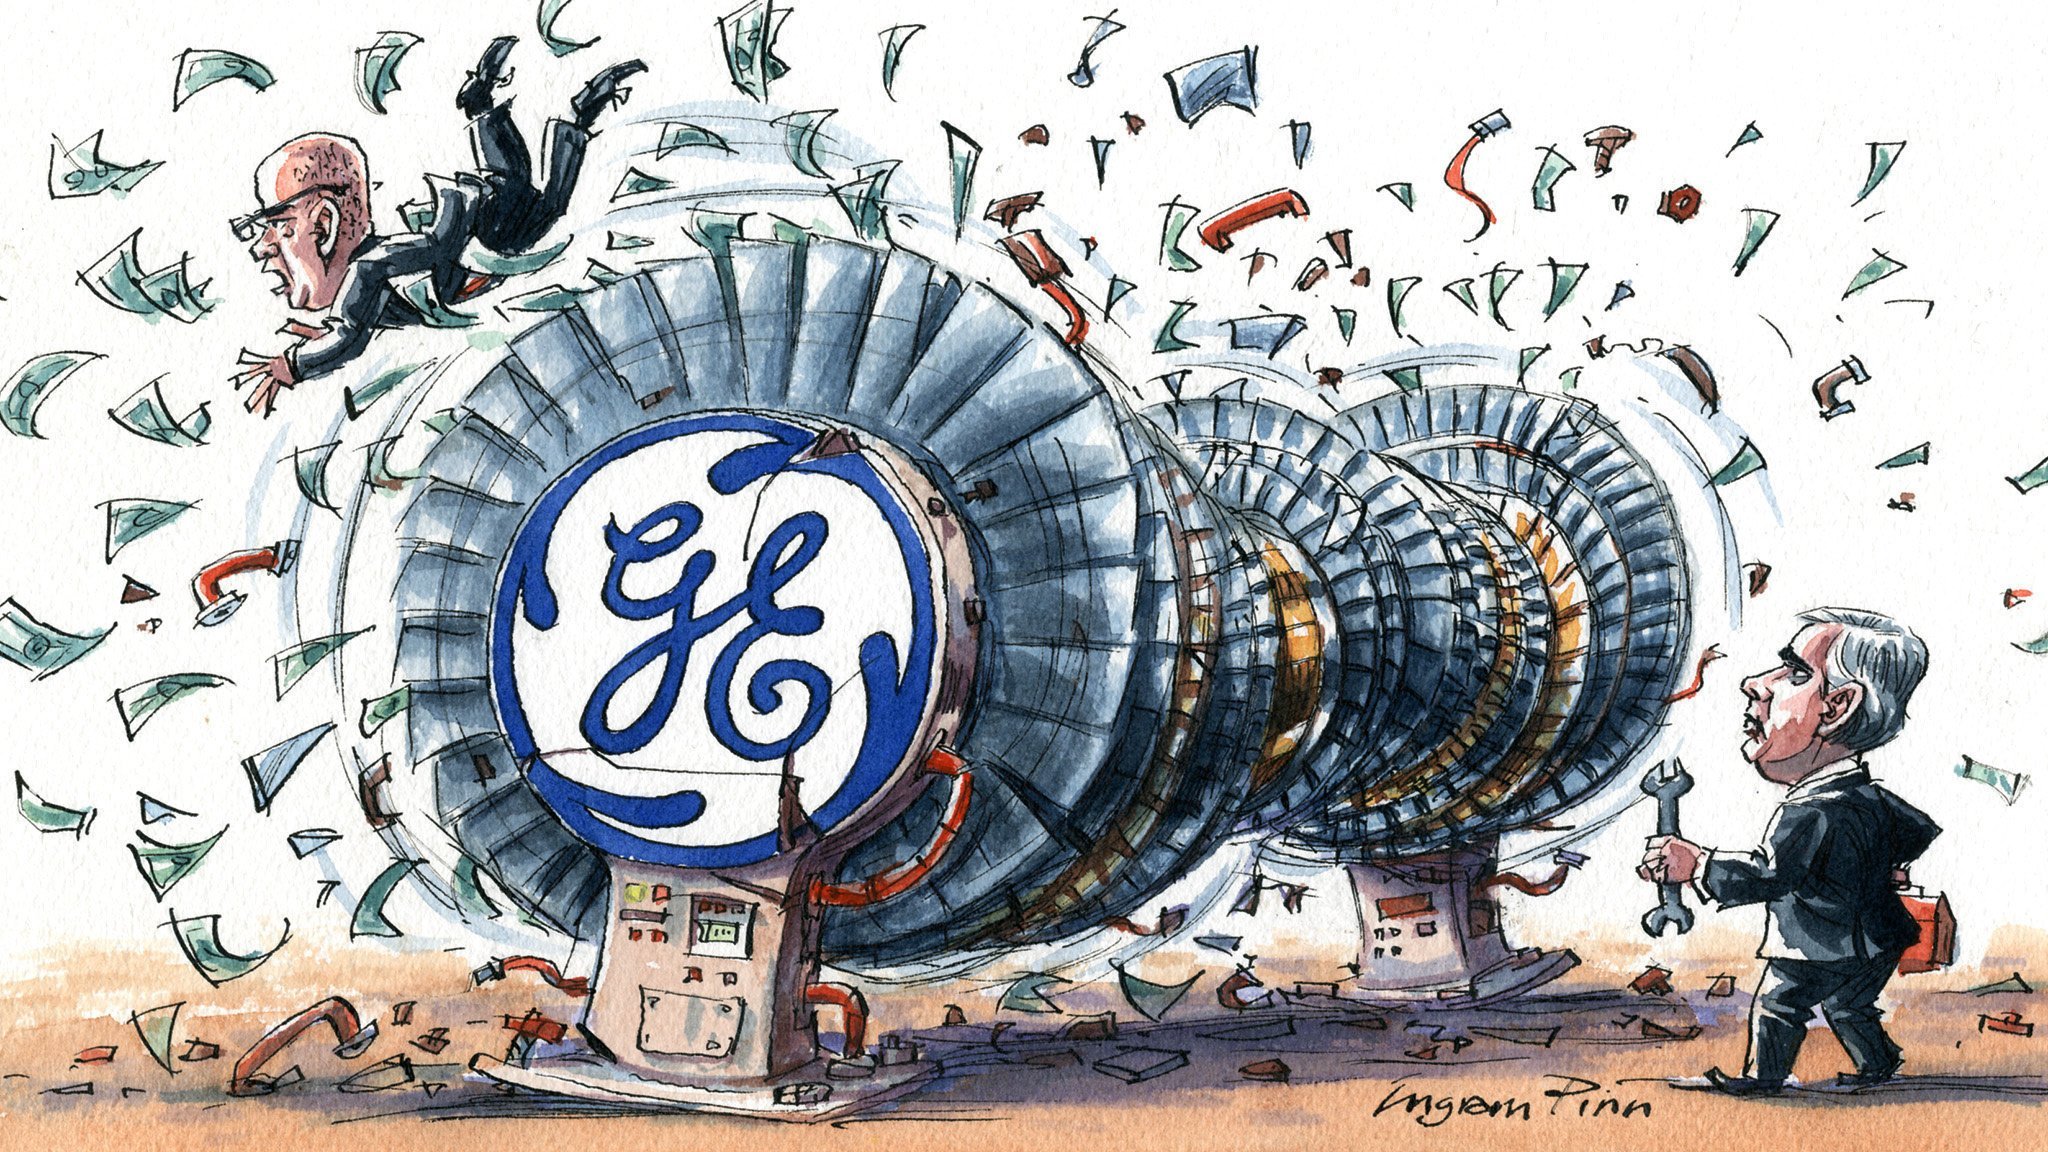 General Electric has an overactive imagination